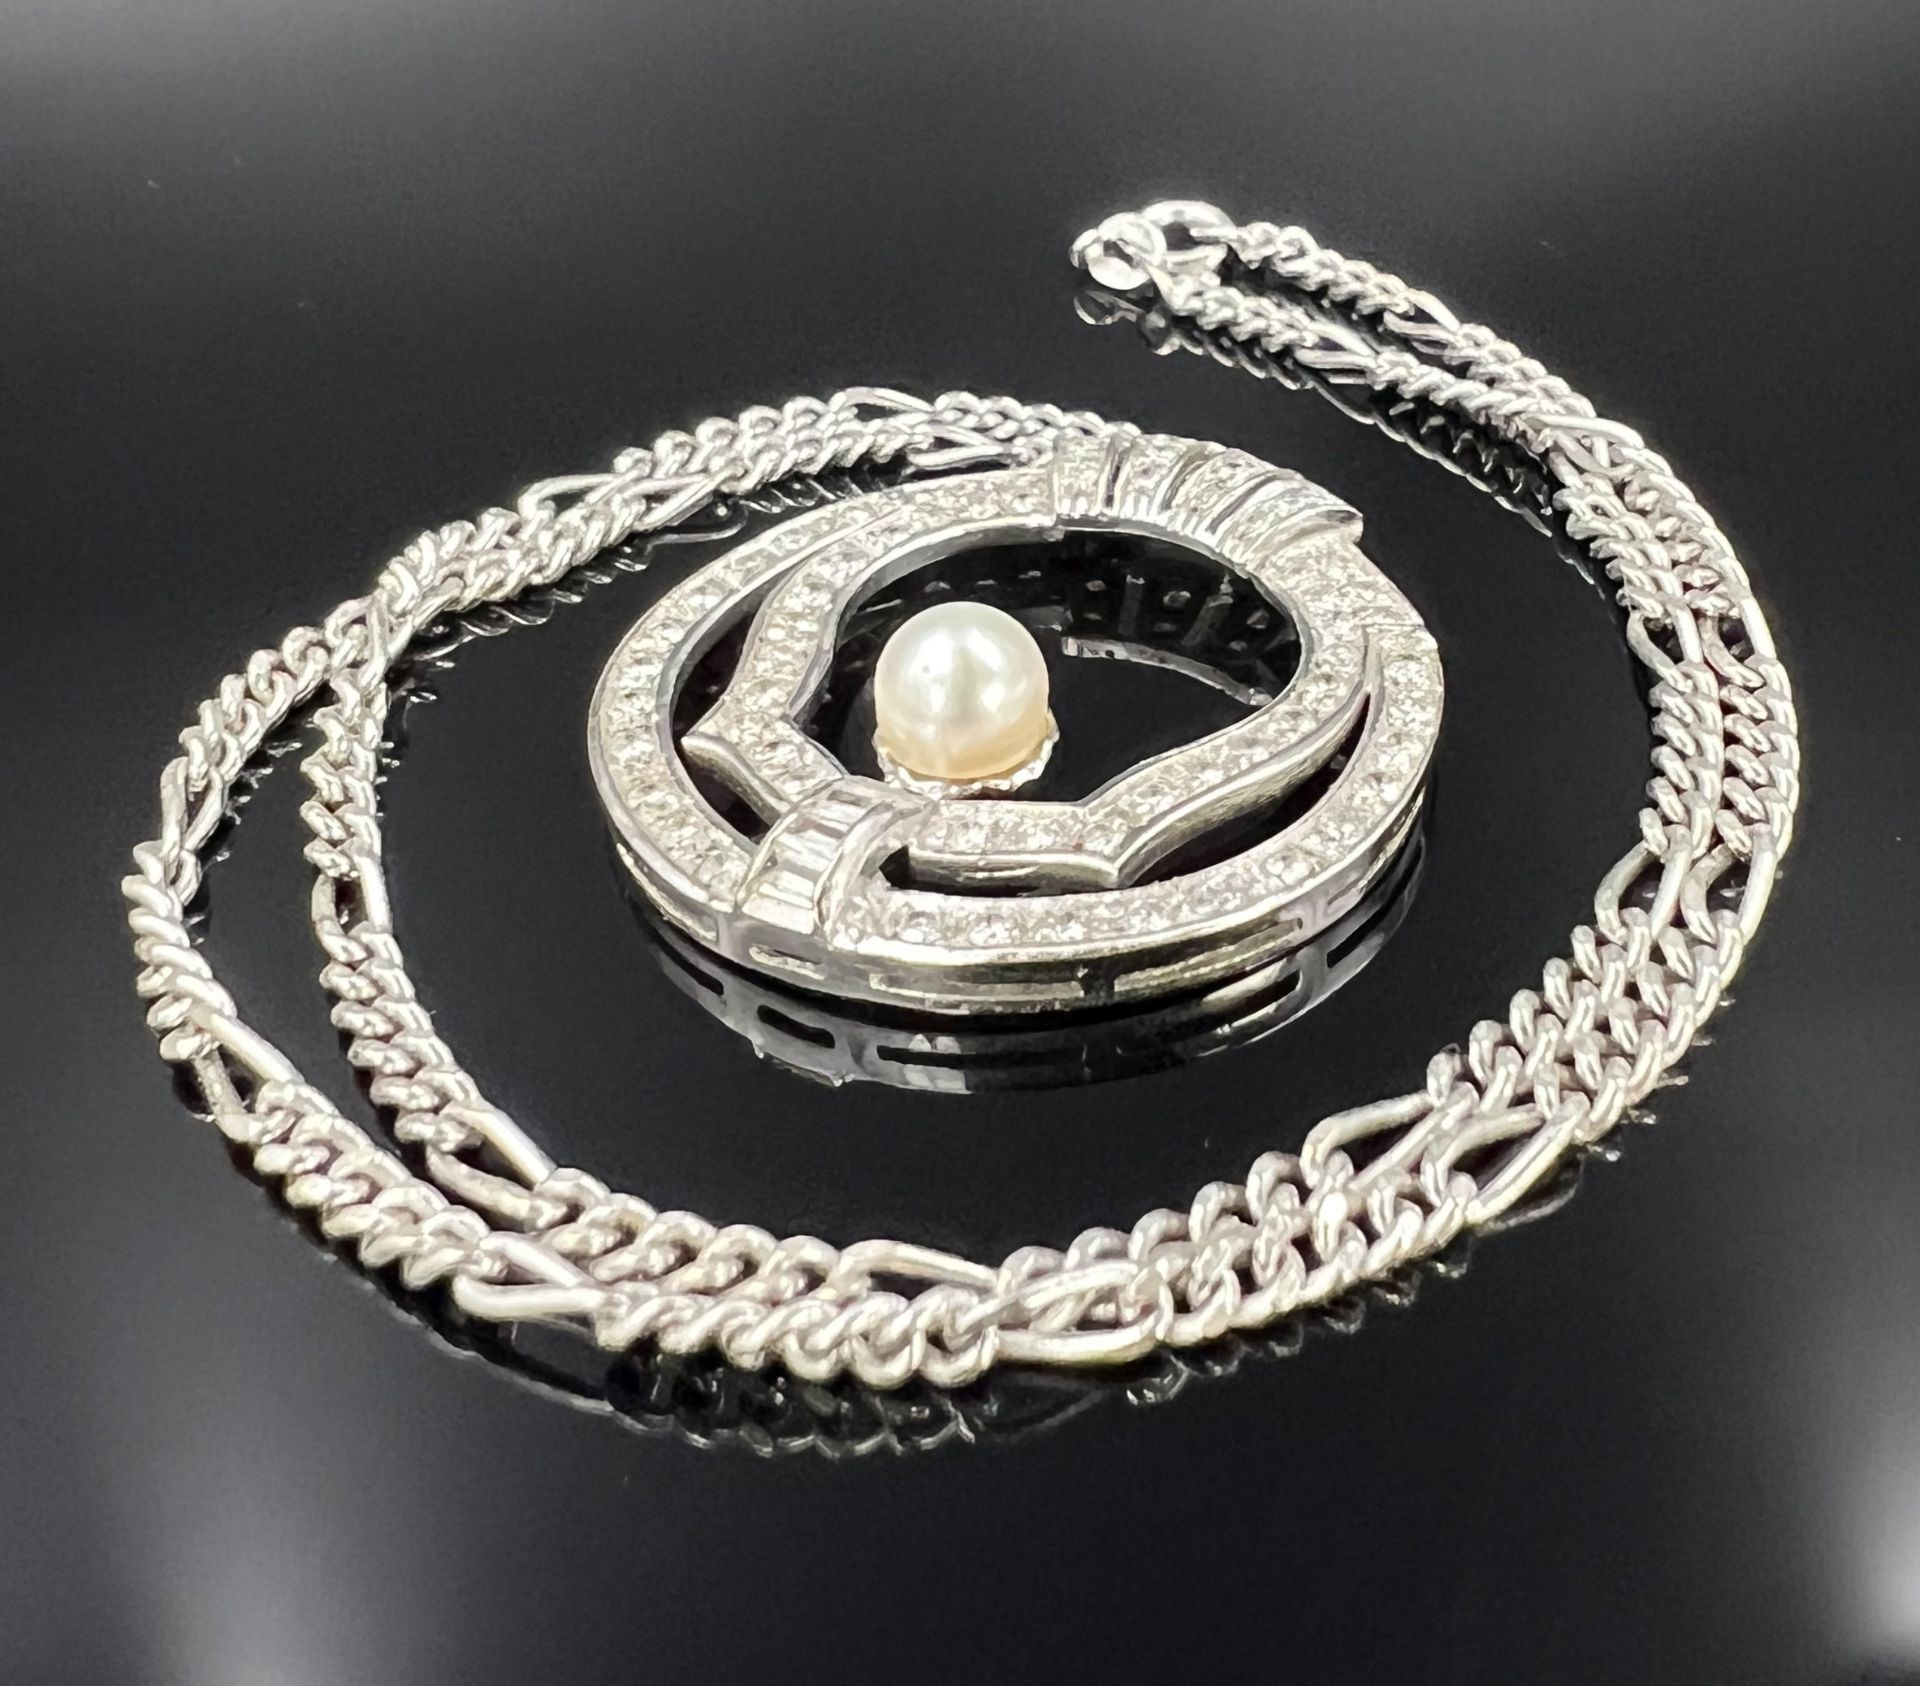 Necklace. 585 white gold with a pearl and diamonds.